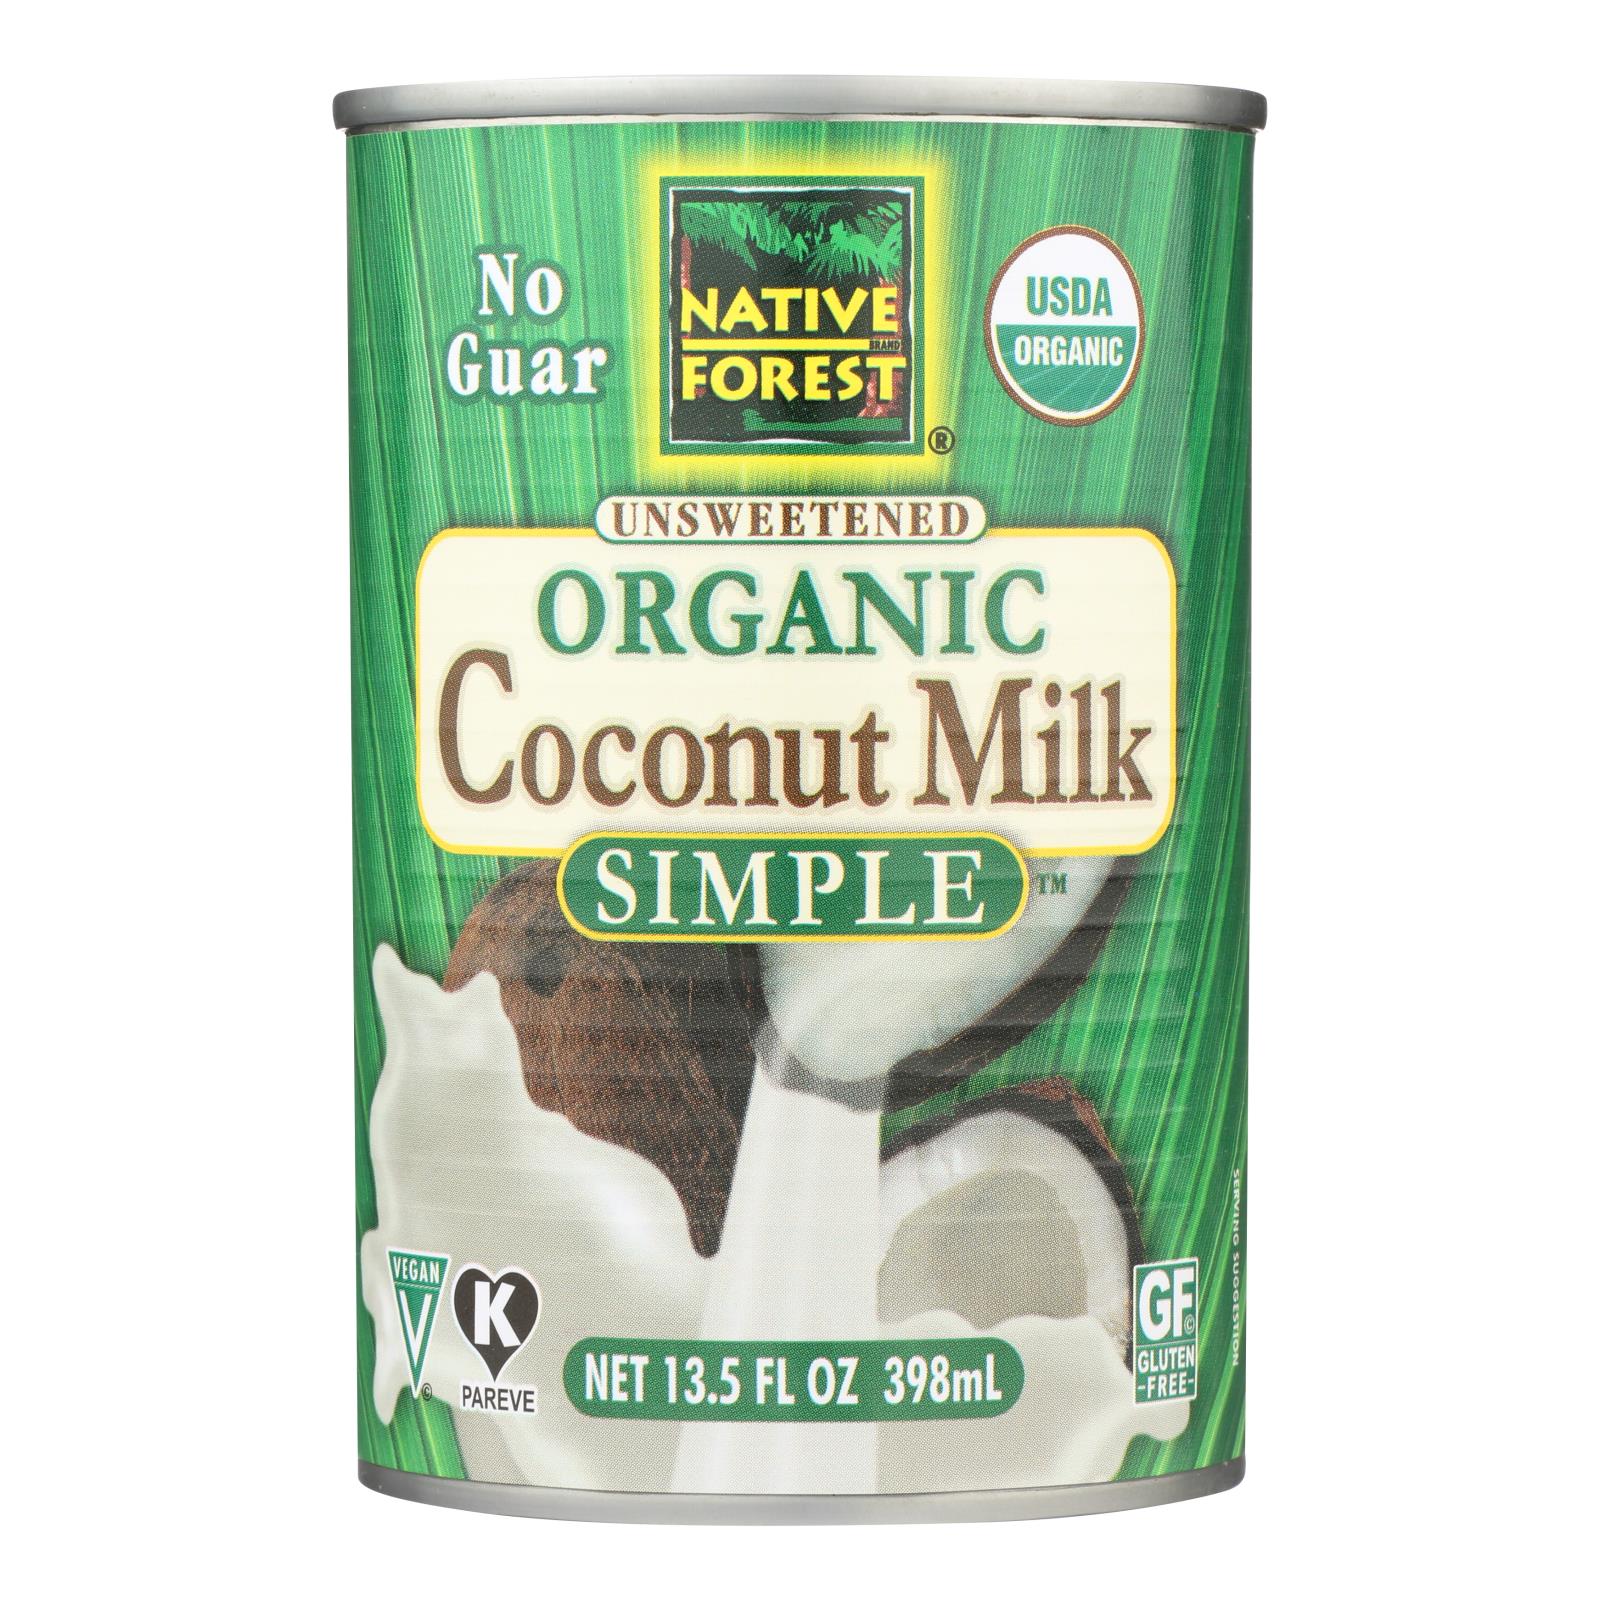 Native Forest Organic Coconut Milk - Pure and Simple - 12개 묶음상품 - 13.5 fl oz